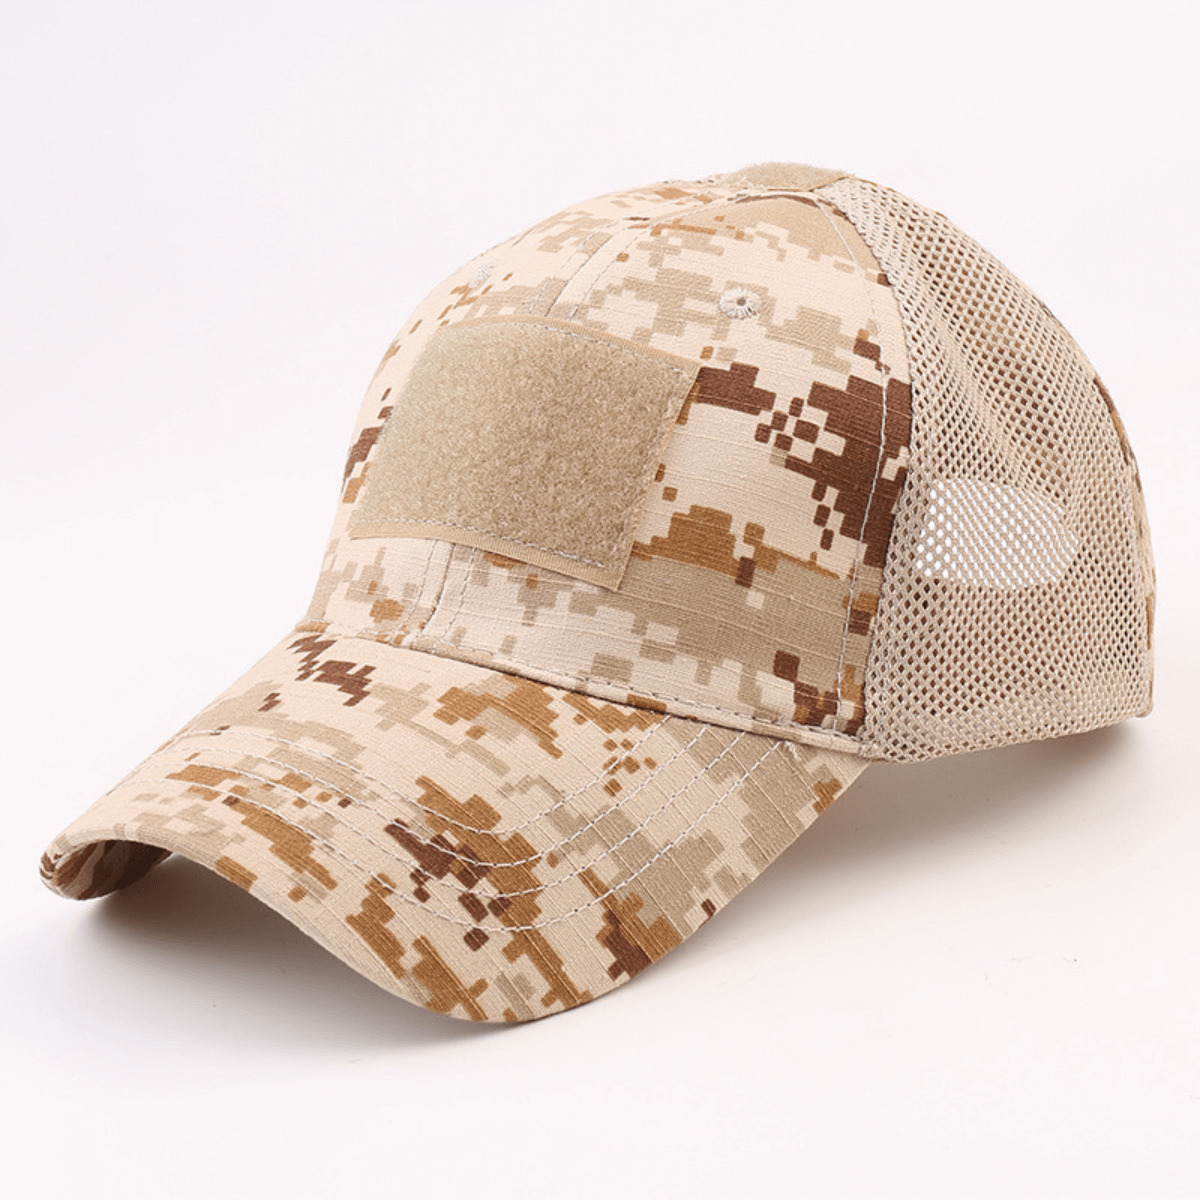 Tactical-Style Patch Hat With Adjustable Strap - Desert